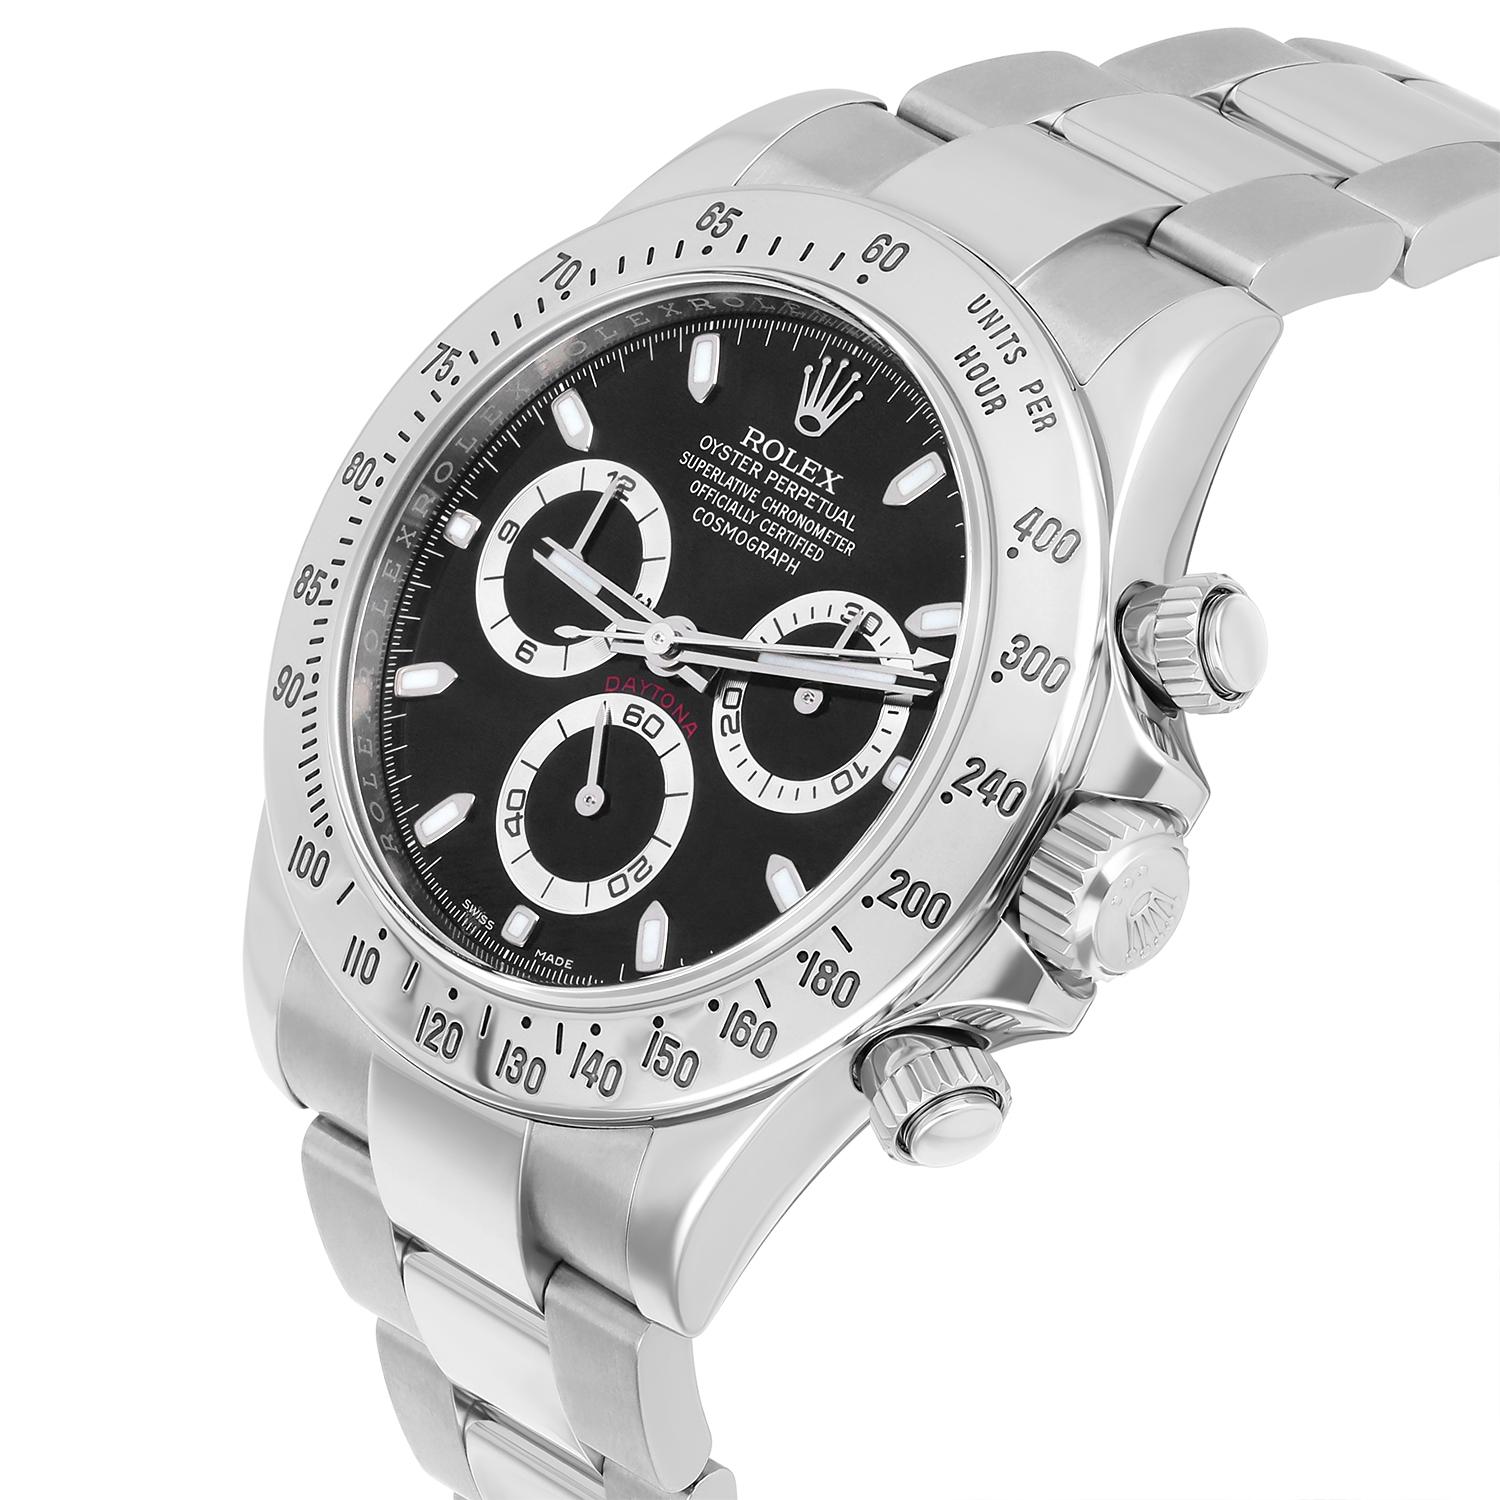 Rolex Cosmograph Daytona Stainless Steel 40mm Black Men's Watch 116520 For Sale 2